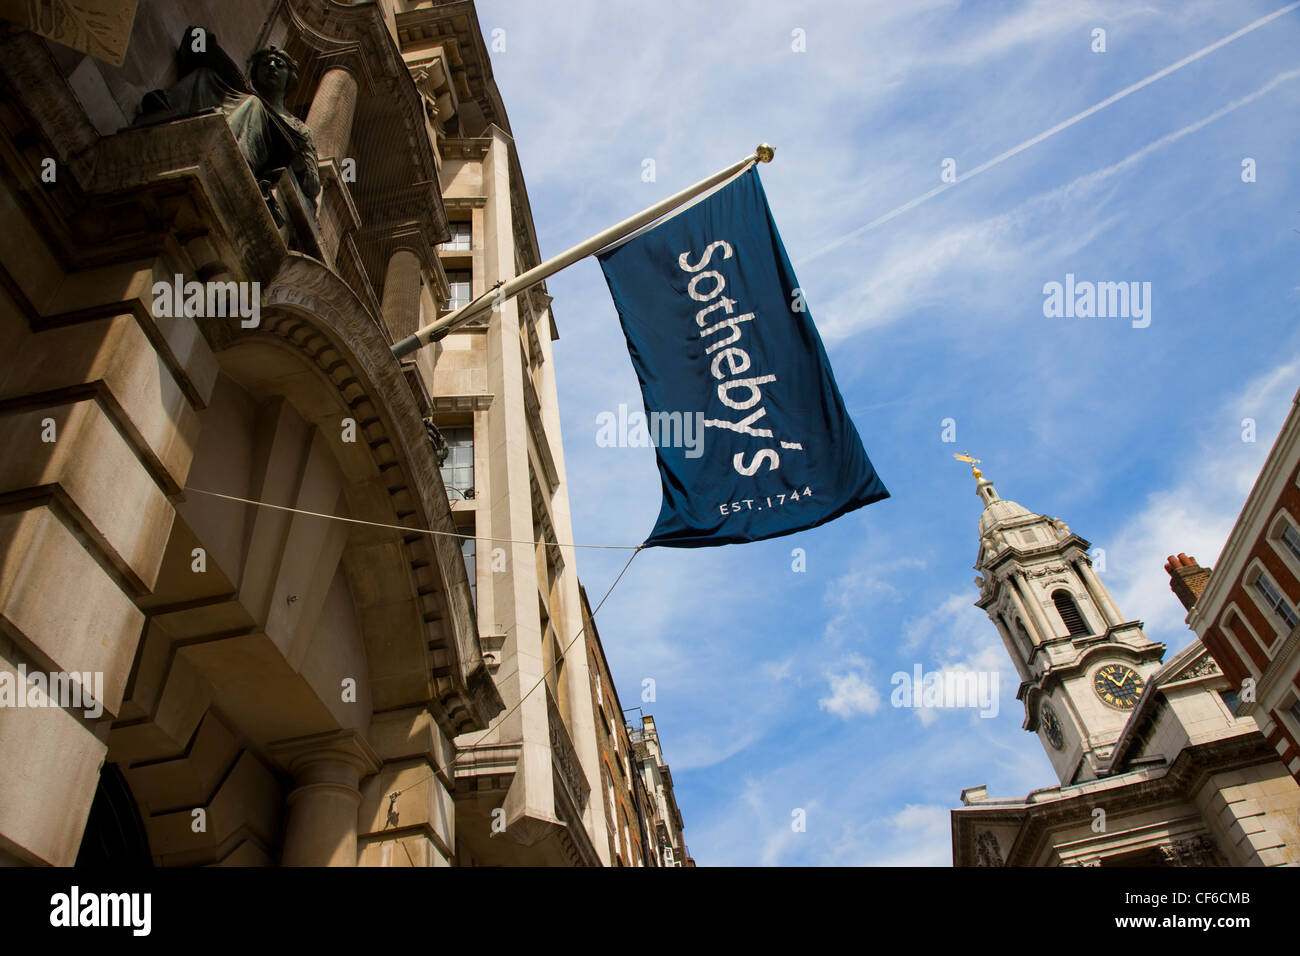 Flag flying above the entrance to Sotheby's in London. Stock Photo